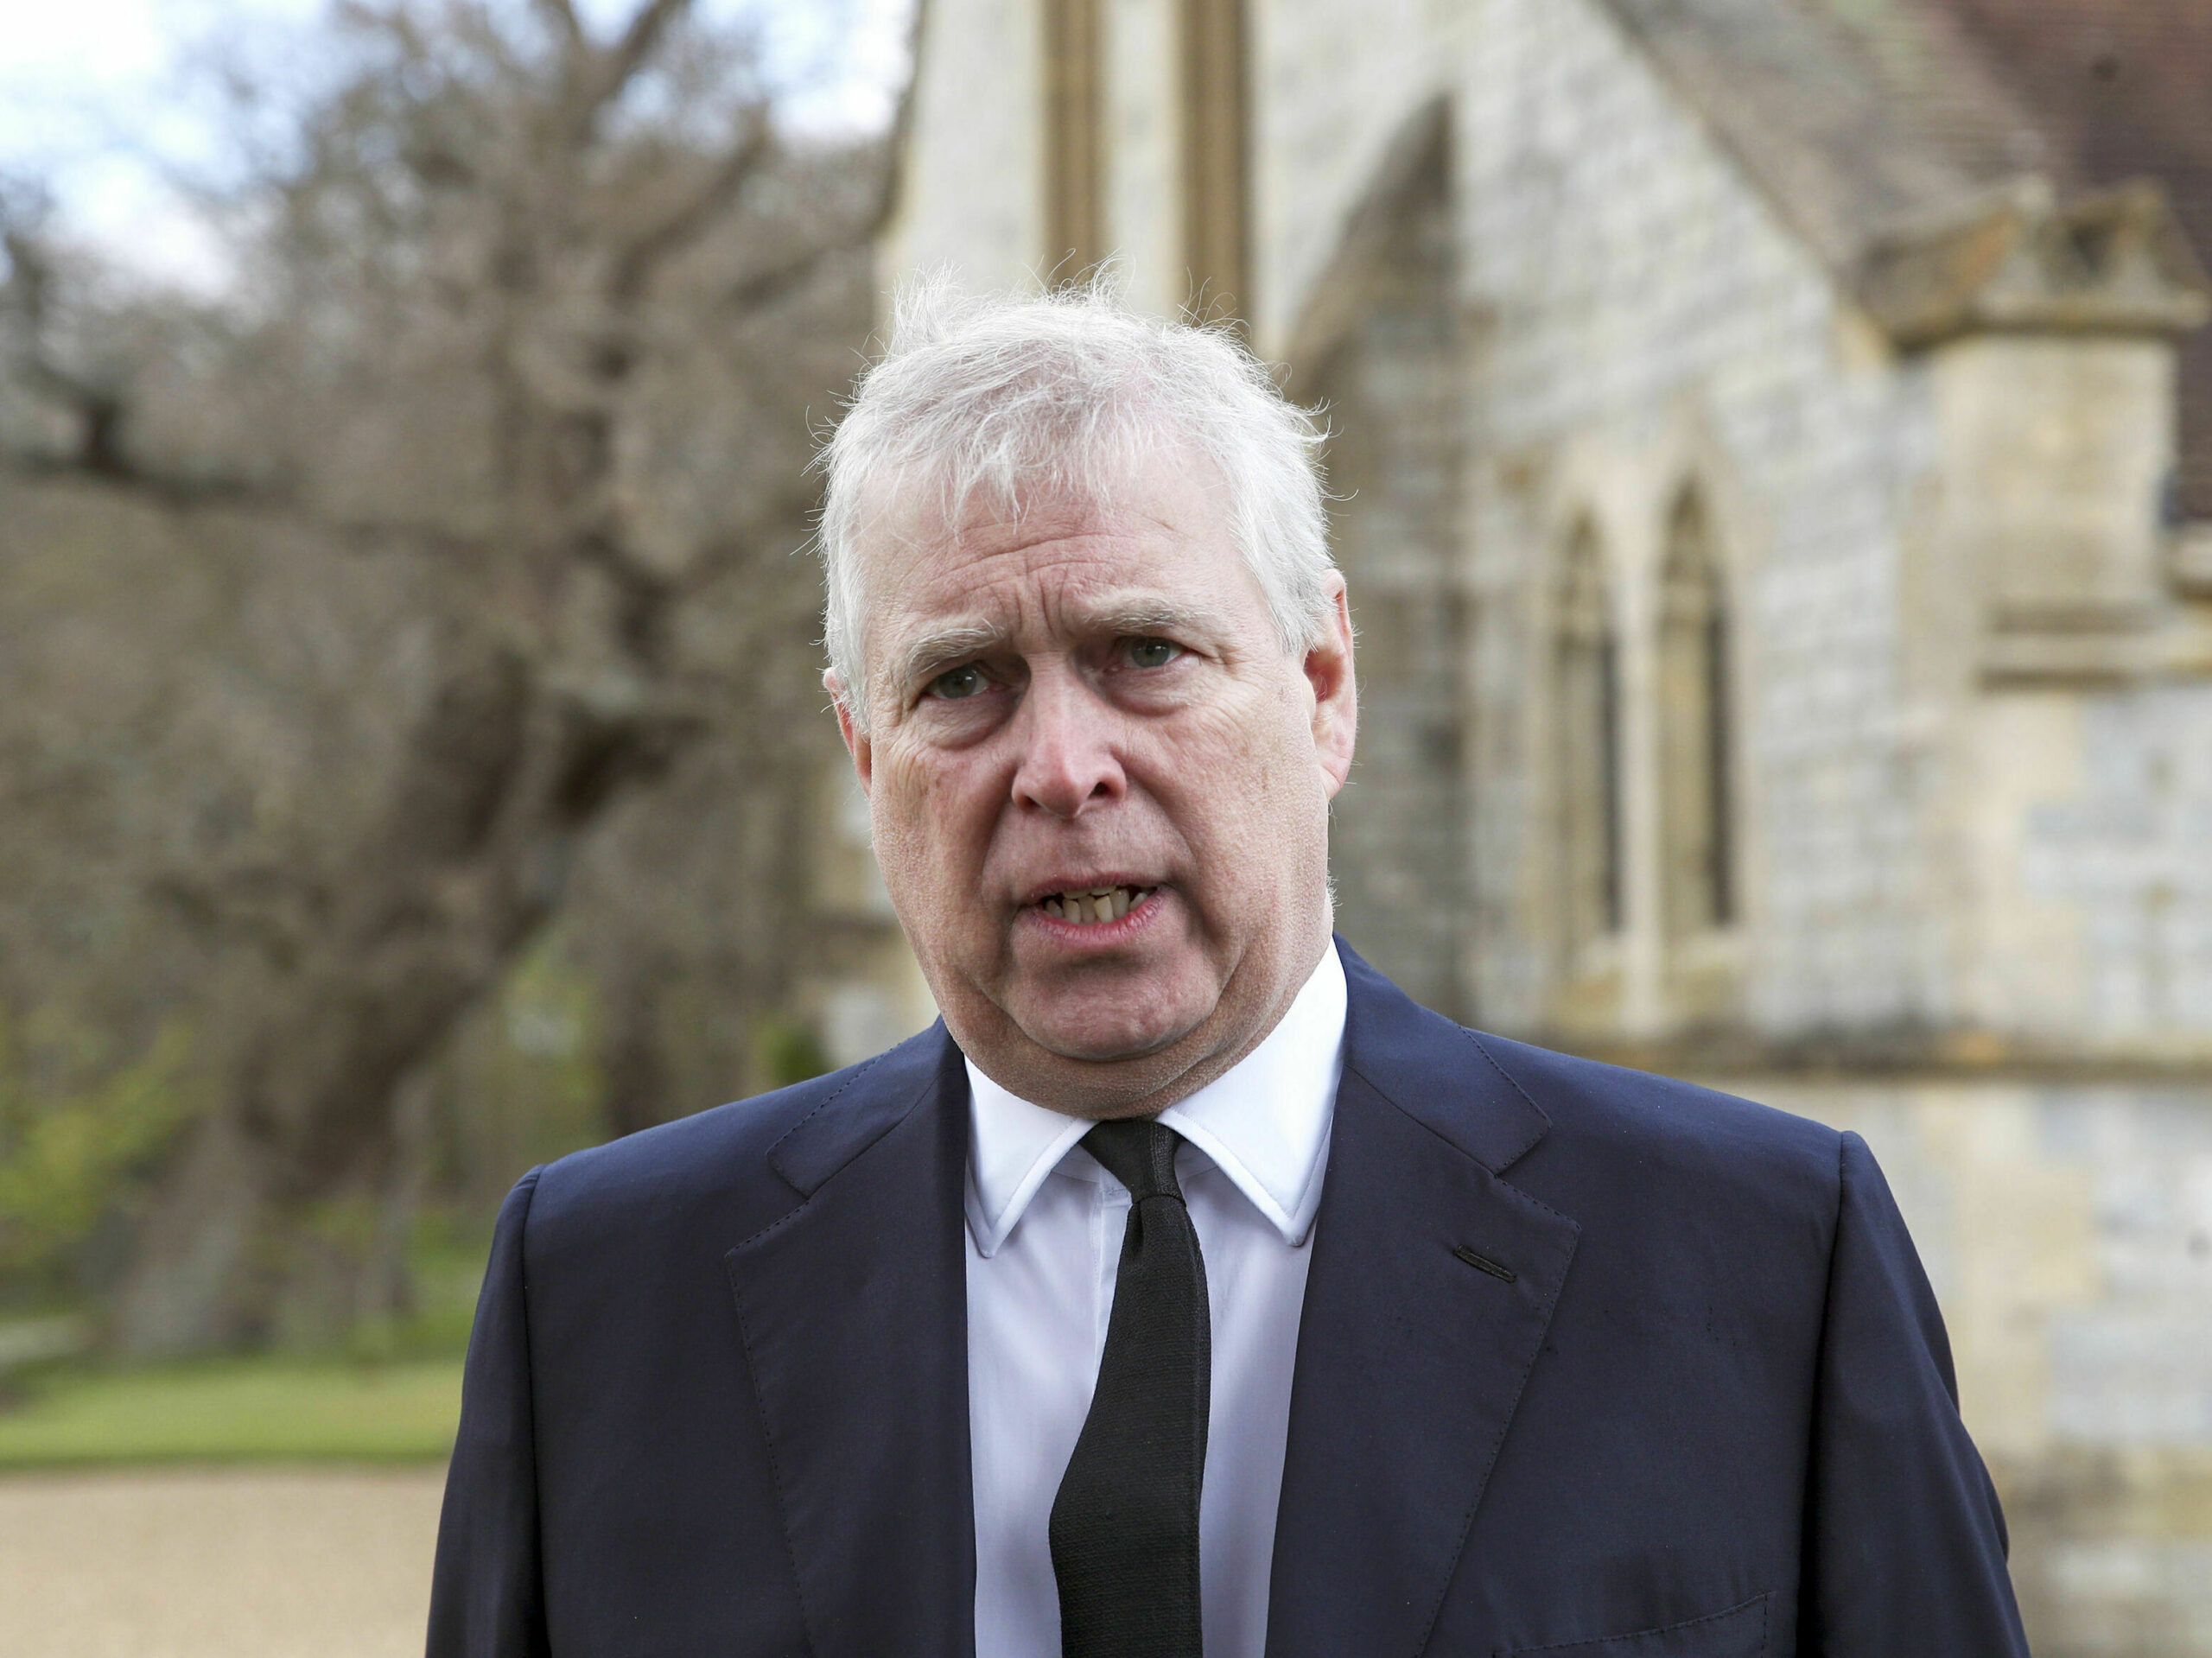 Prince Andrew's 2019 BBC interview is now the subject of a Netflix film.